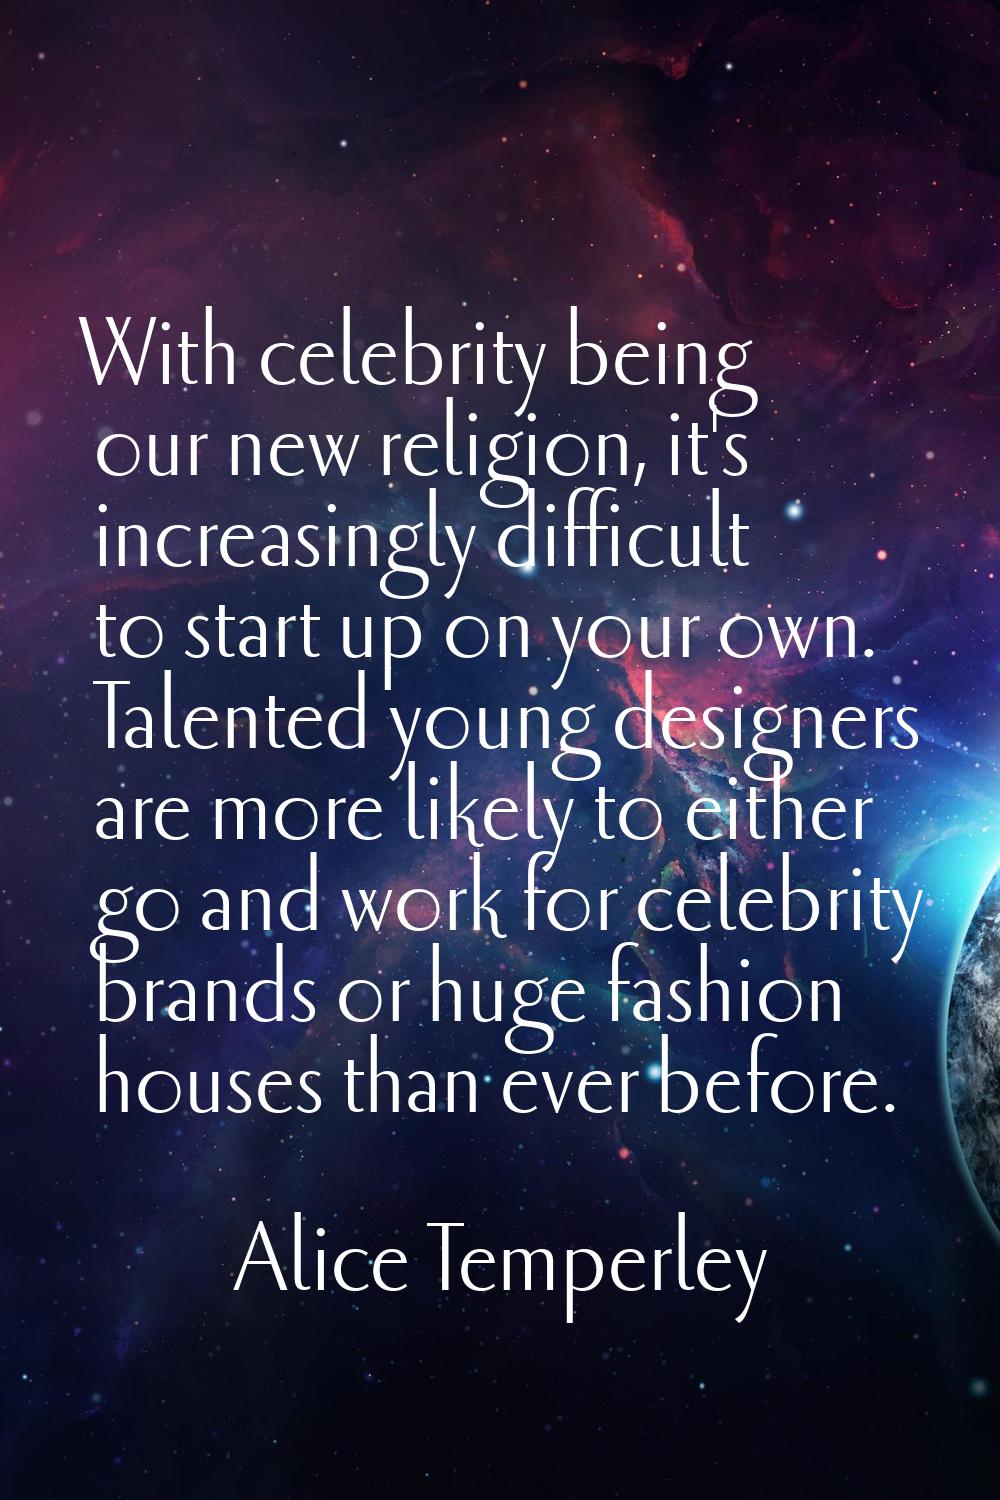 With celebrity being our new religion, it's increasingly difficult to start up on your own. Talente